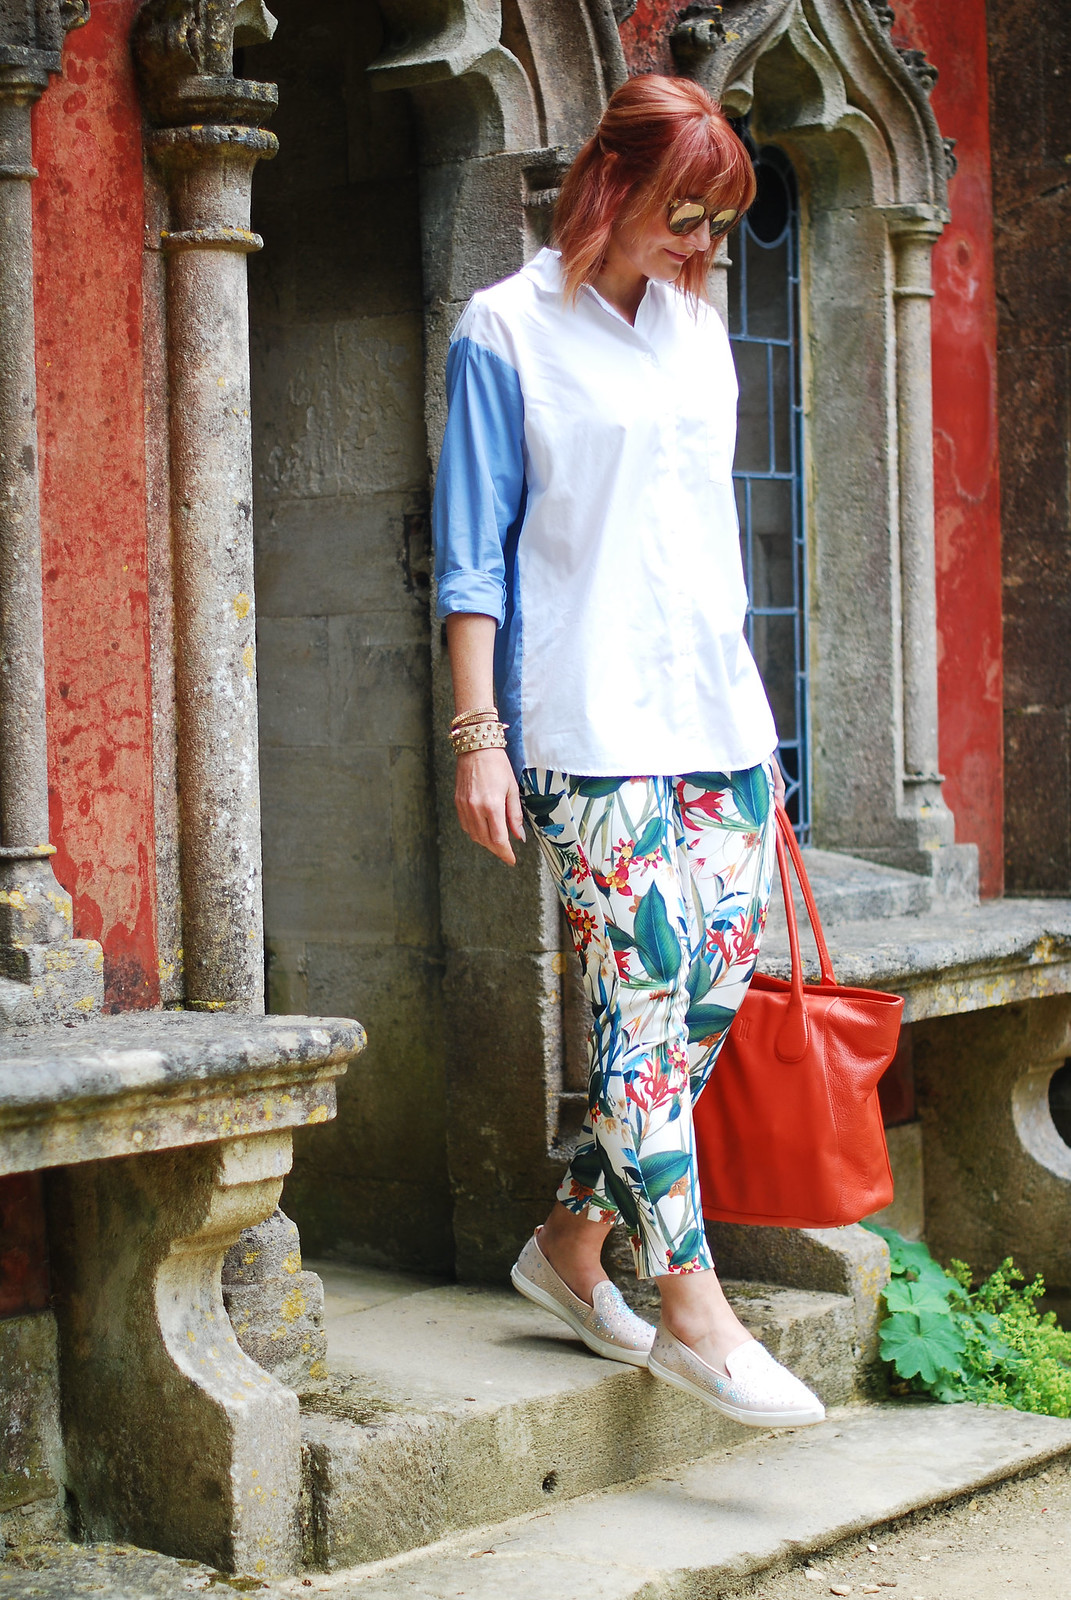 Summer style: Two-tone button up shirt, tropical print pants, orange tote, embellished sneakers (Painswick Rococo Garden, the Cotswolds) | Not Dressed As Lamb, over 40 style